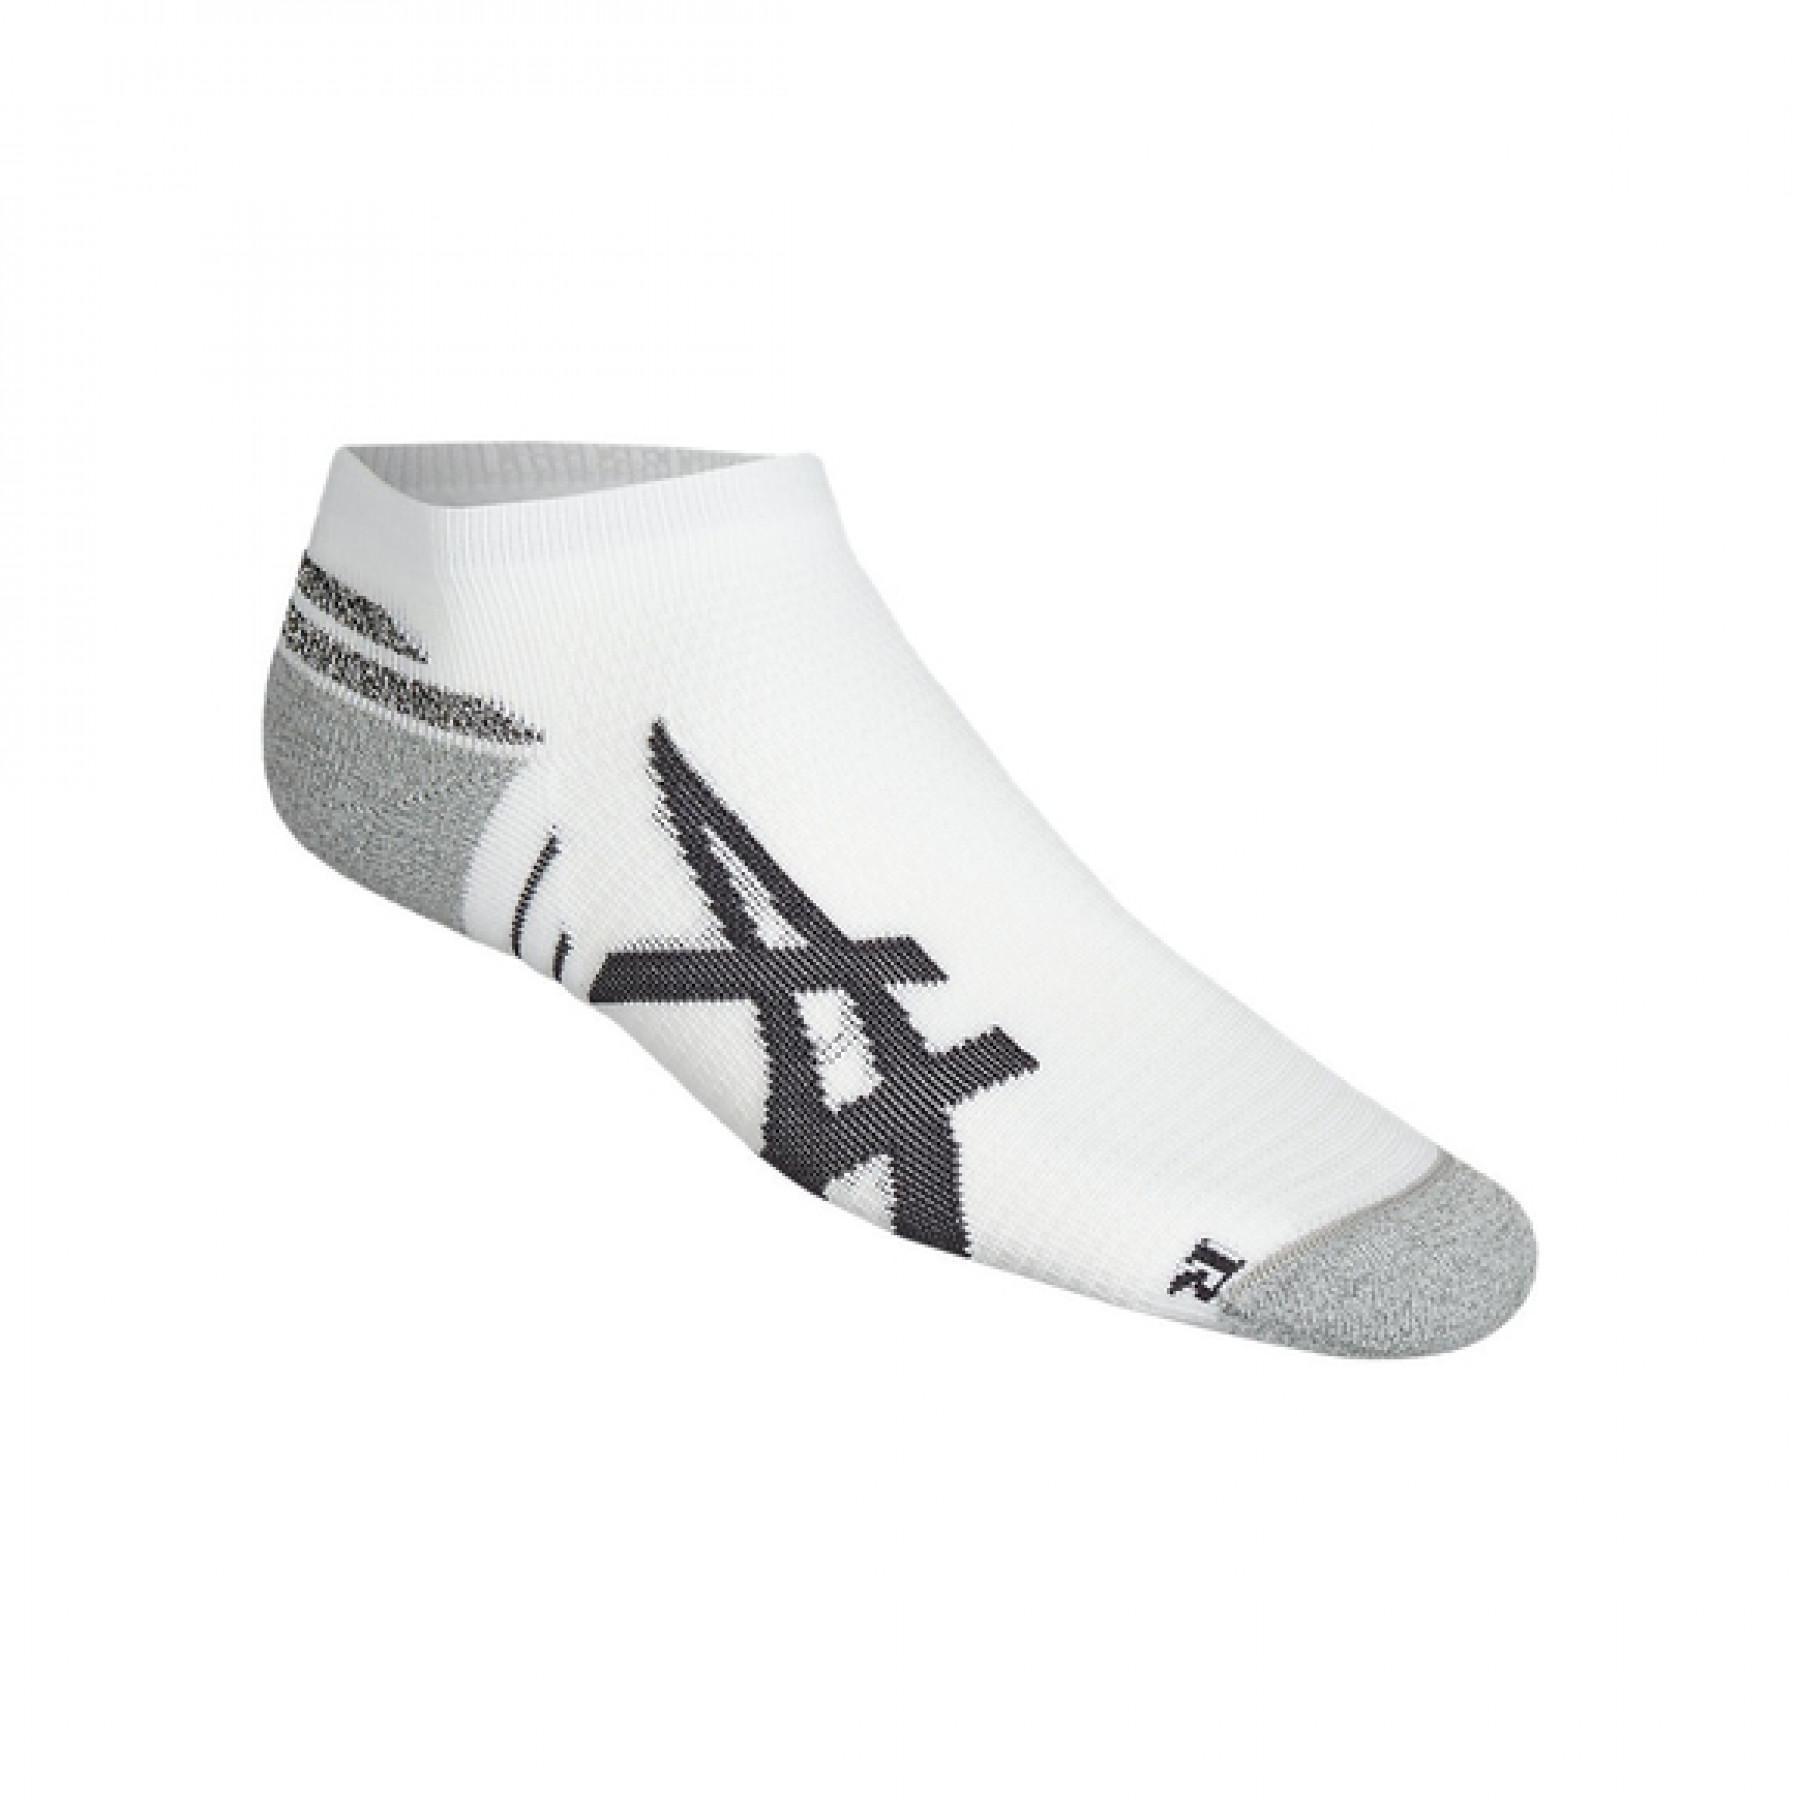 Chaussettes Asics Road Grip Ankle